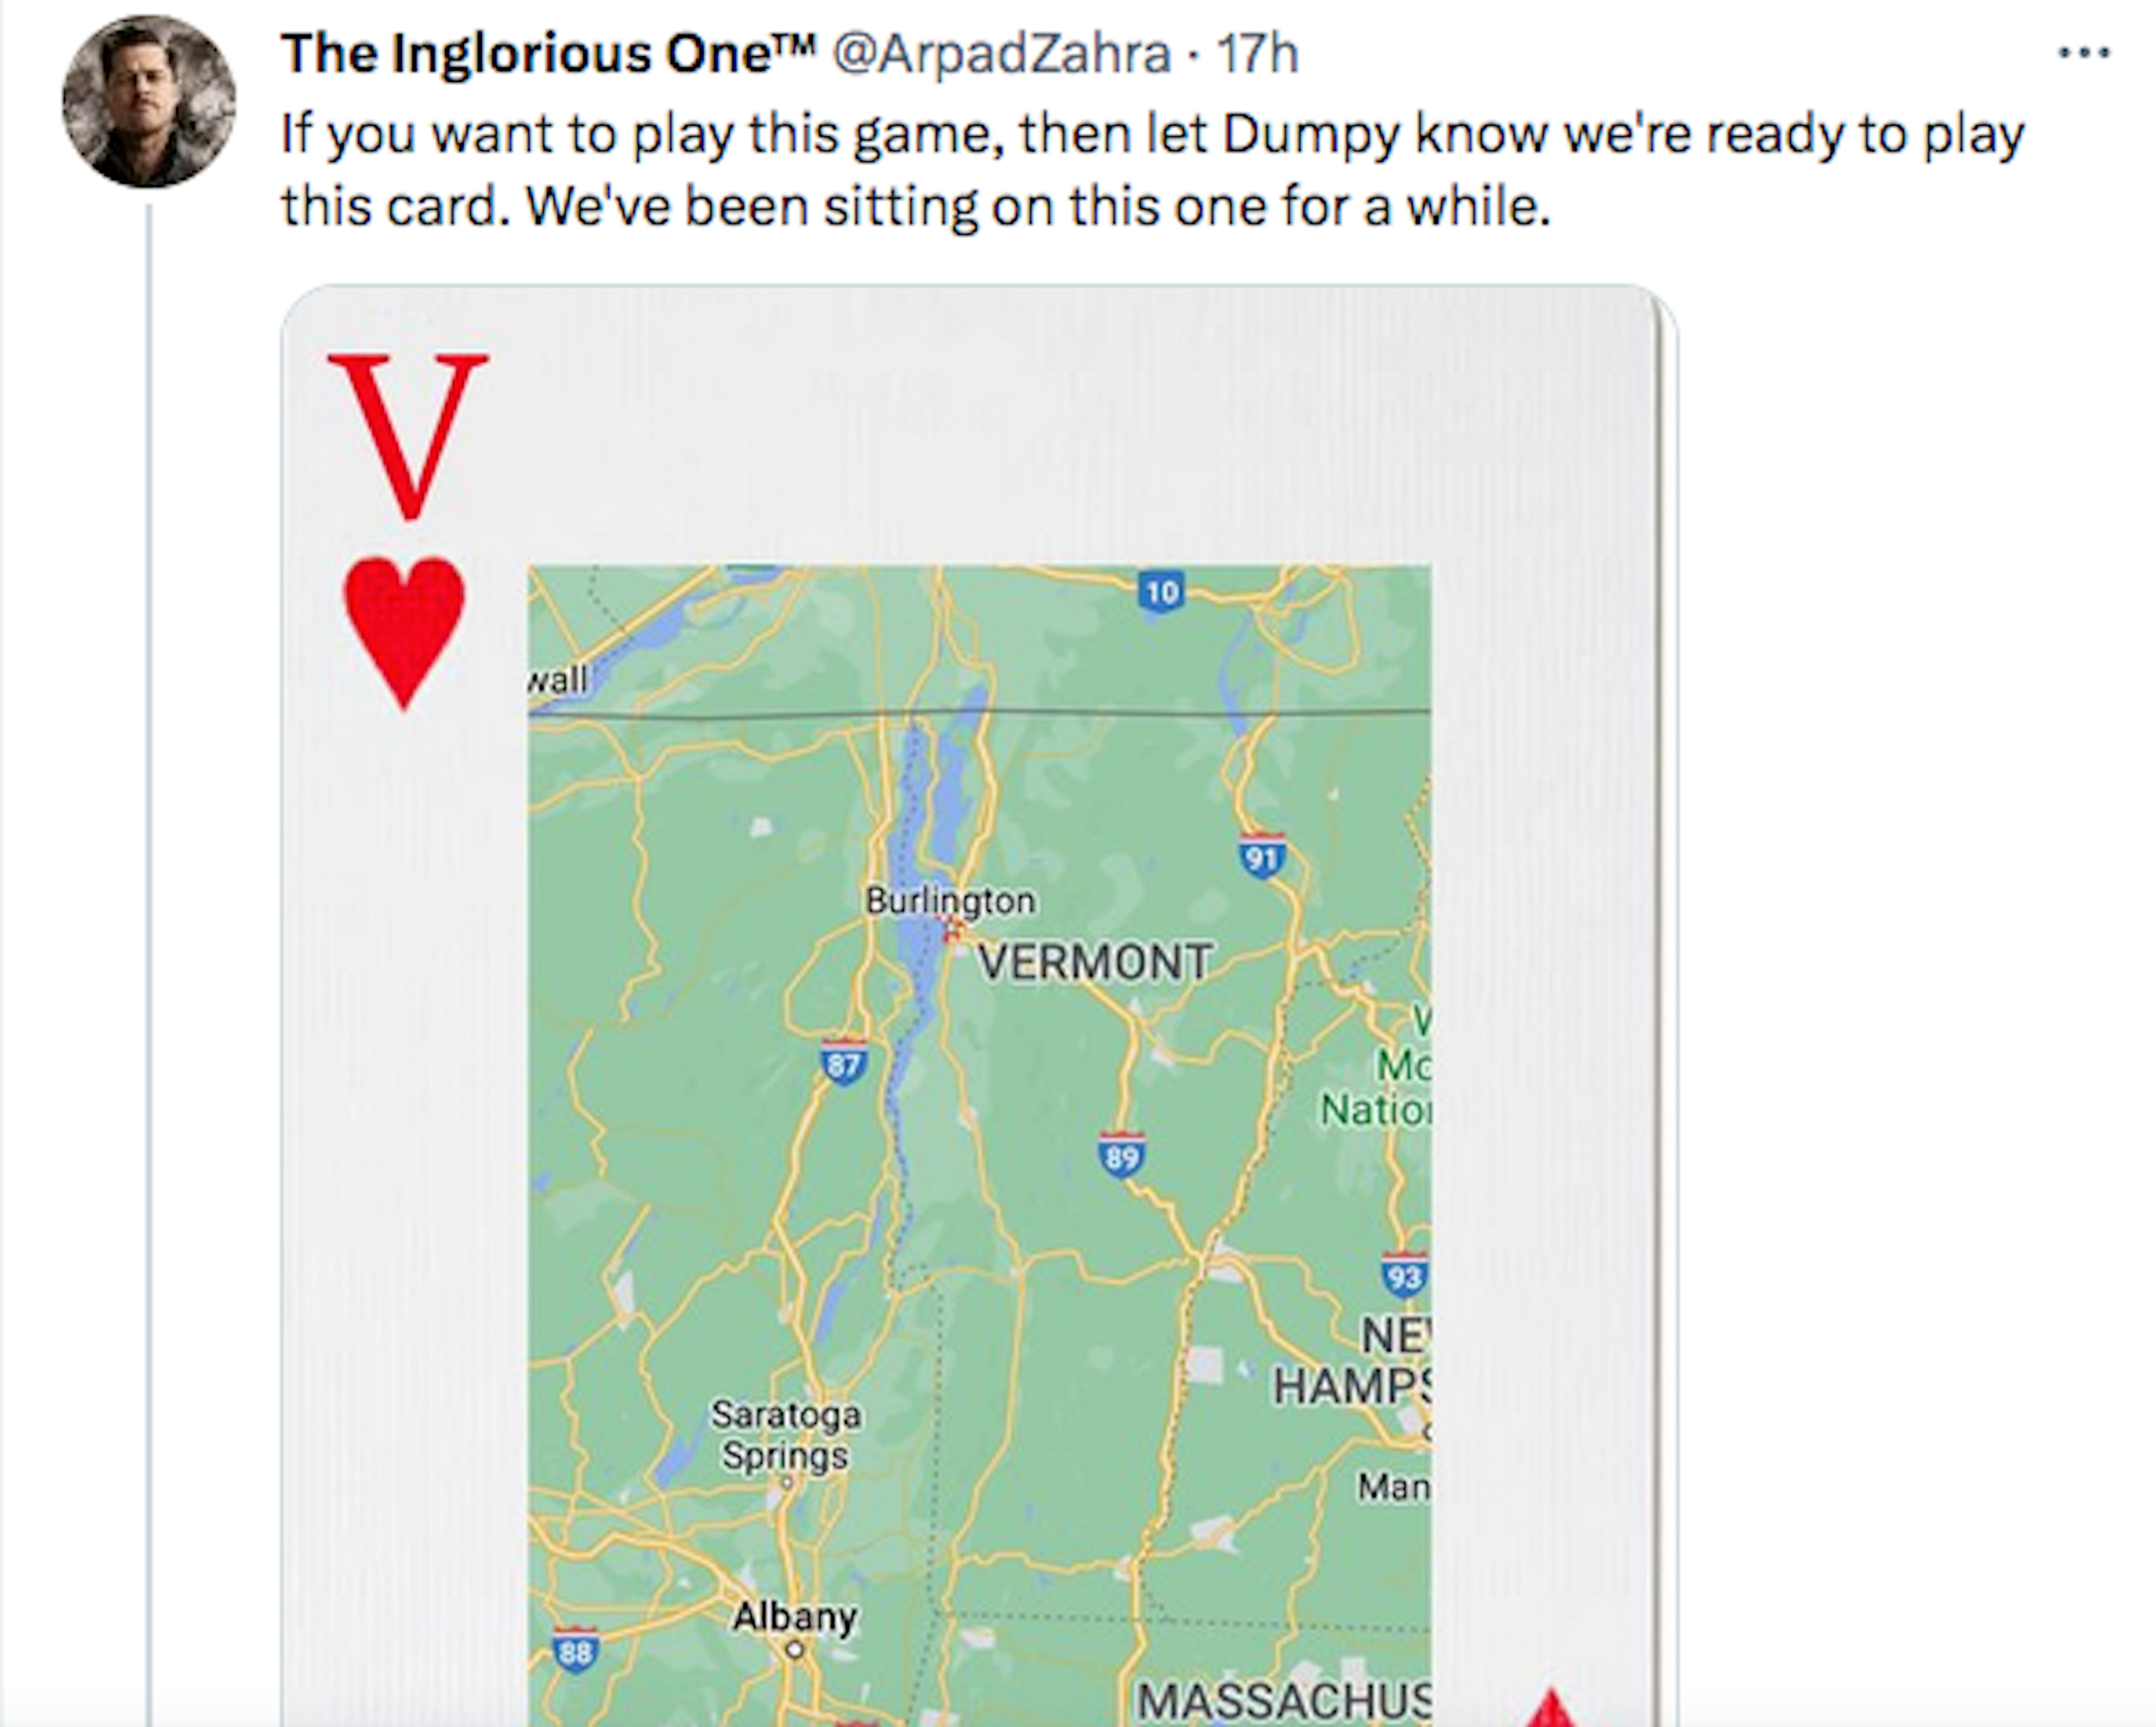 User @ArpadZahra threatening that he has a “card to play” that he’s been “sitting on for a while,” referring to a “Dumpy” and including a “playing card” with the letter V at the corners and a map of VT in the middle.